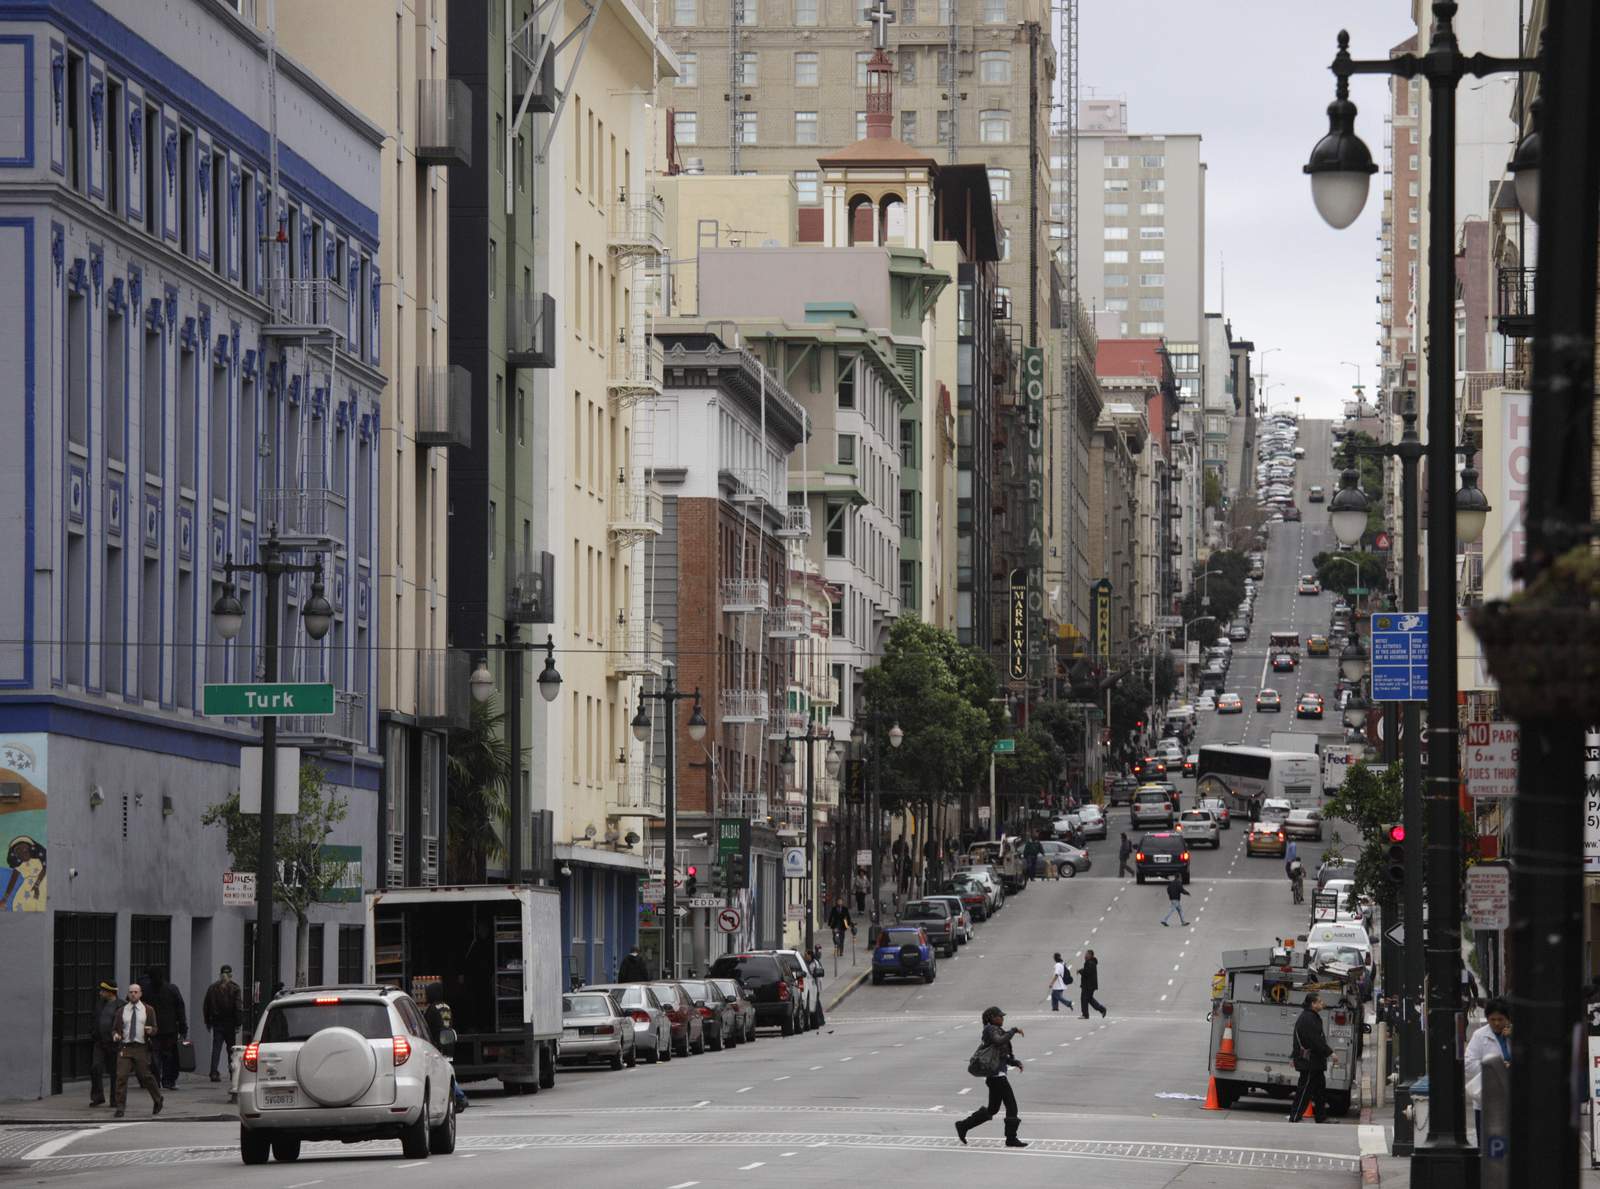 San Francisco sues 28 alleged dealers to stop flow of drugs